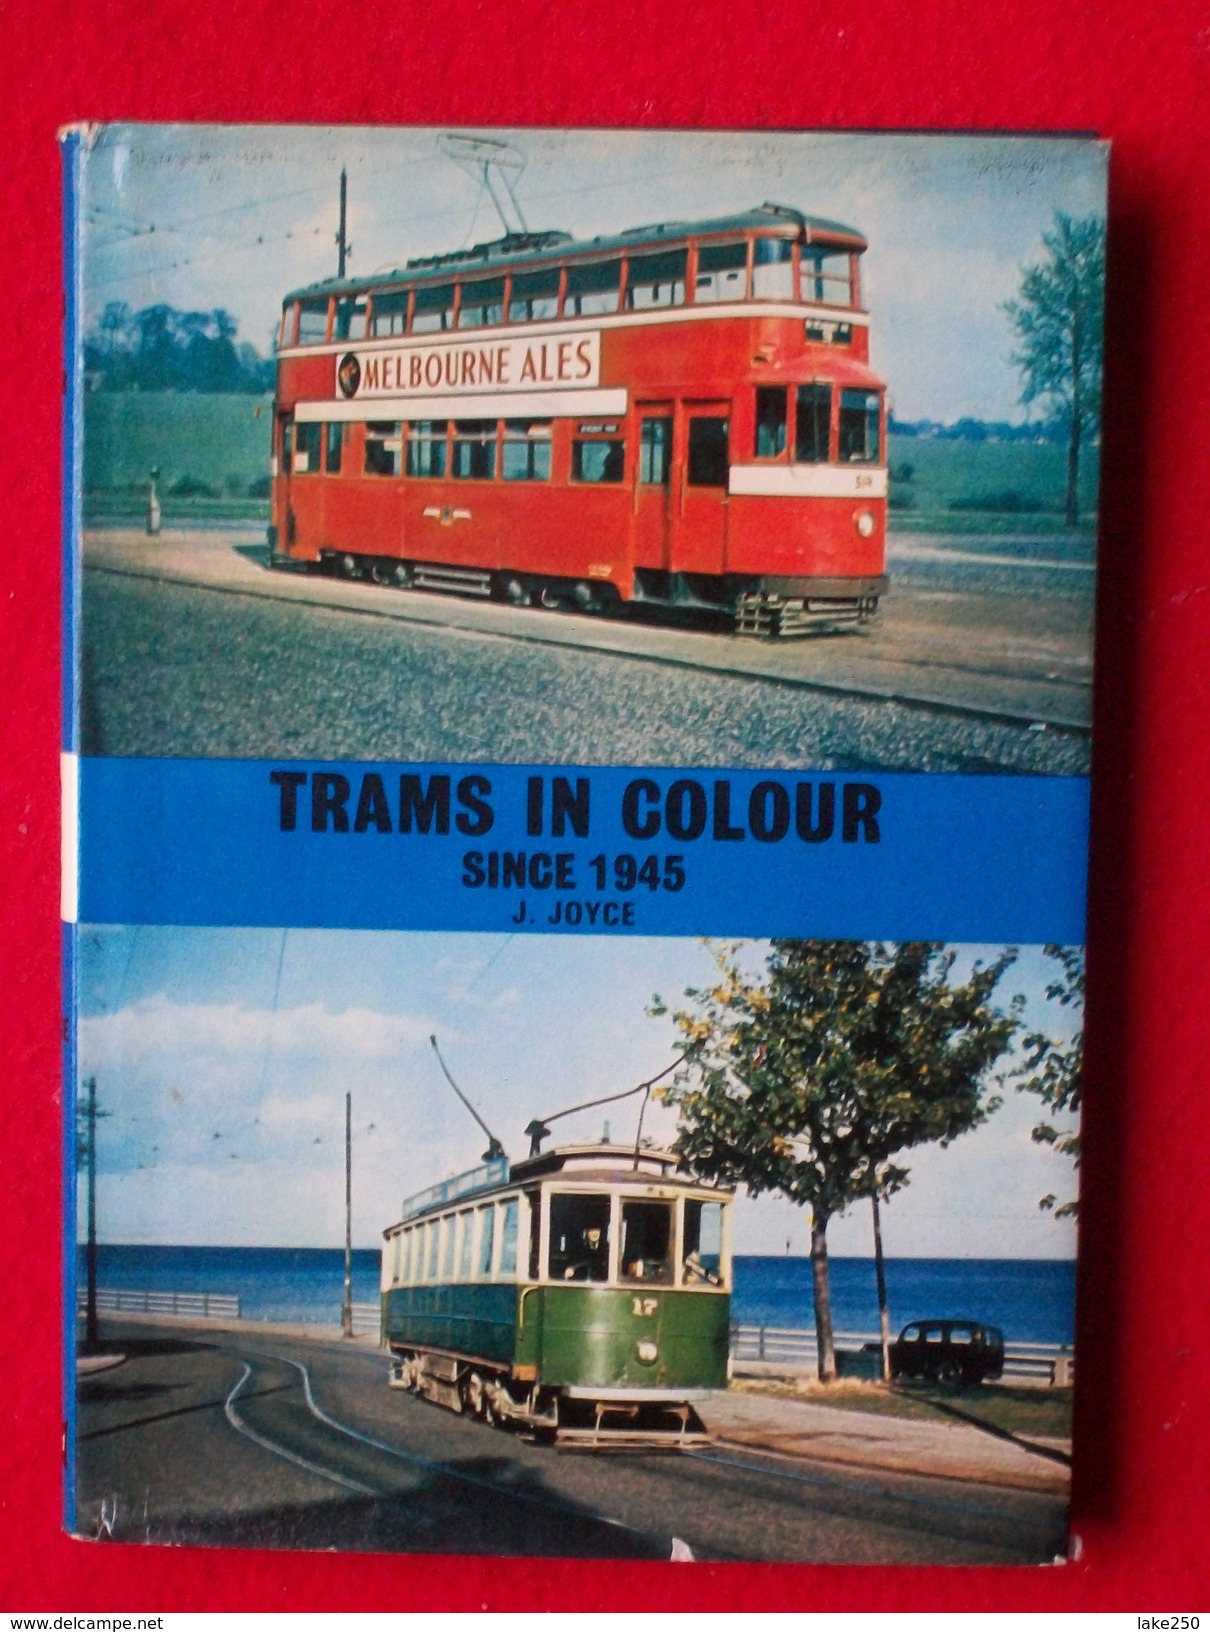 TRAMS IN COLOUR SINCE 1945 - Transports